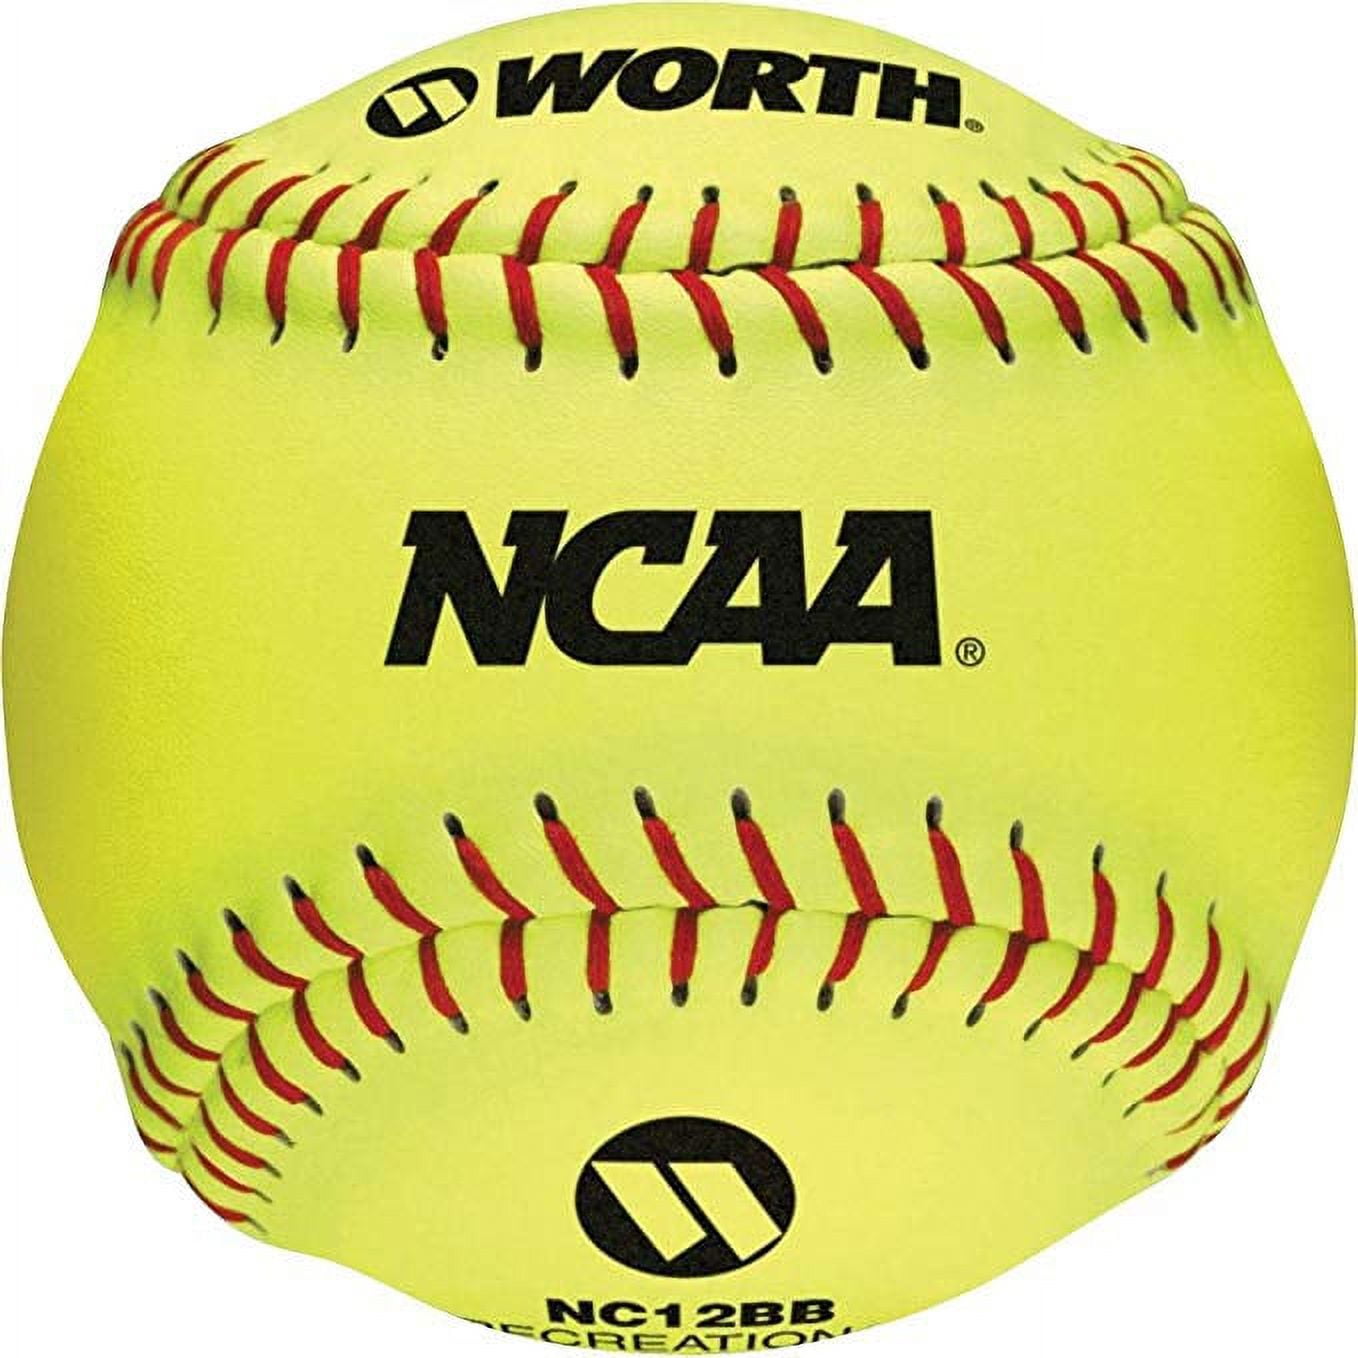 Yellow Sports Practice Softballs, 12-inch Official Size And Weight  Softball, Unmarked & Leather Covered Training Ball For Games,  Practice1pcyellow